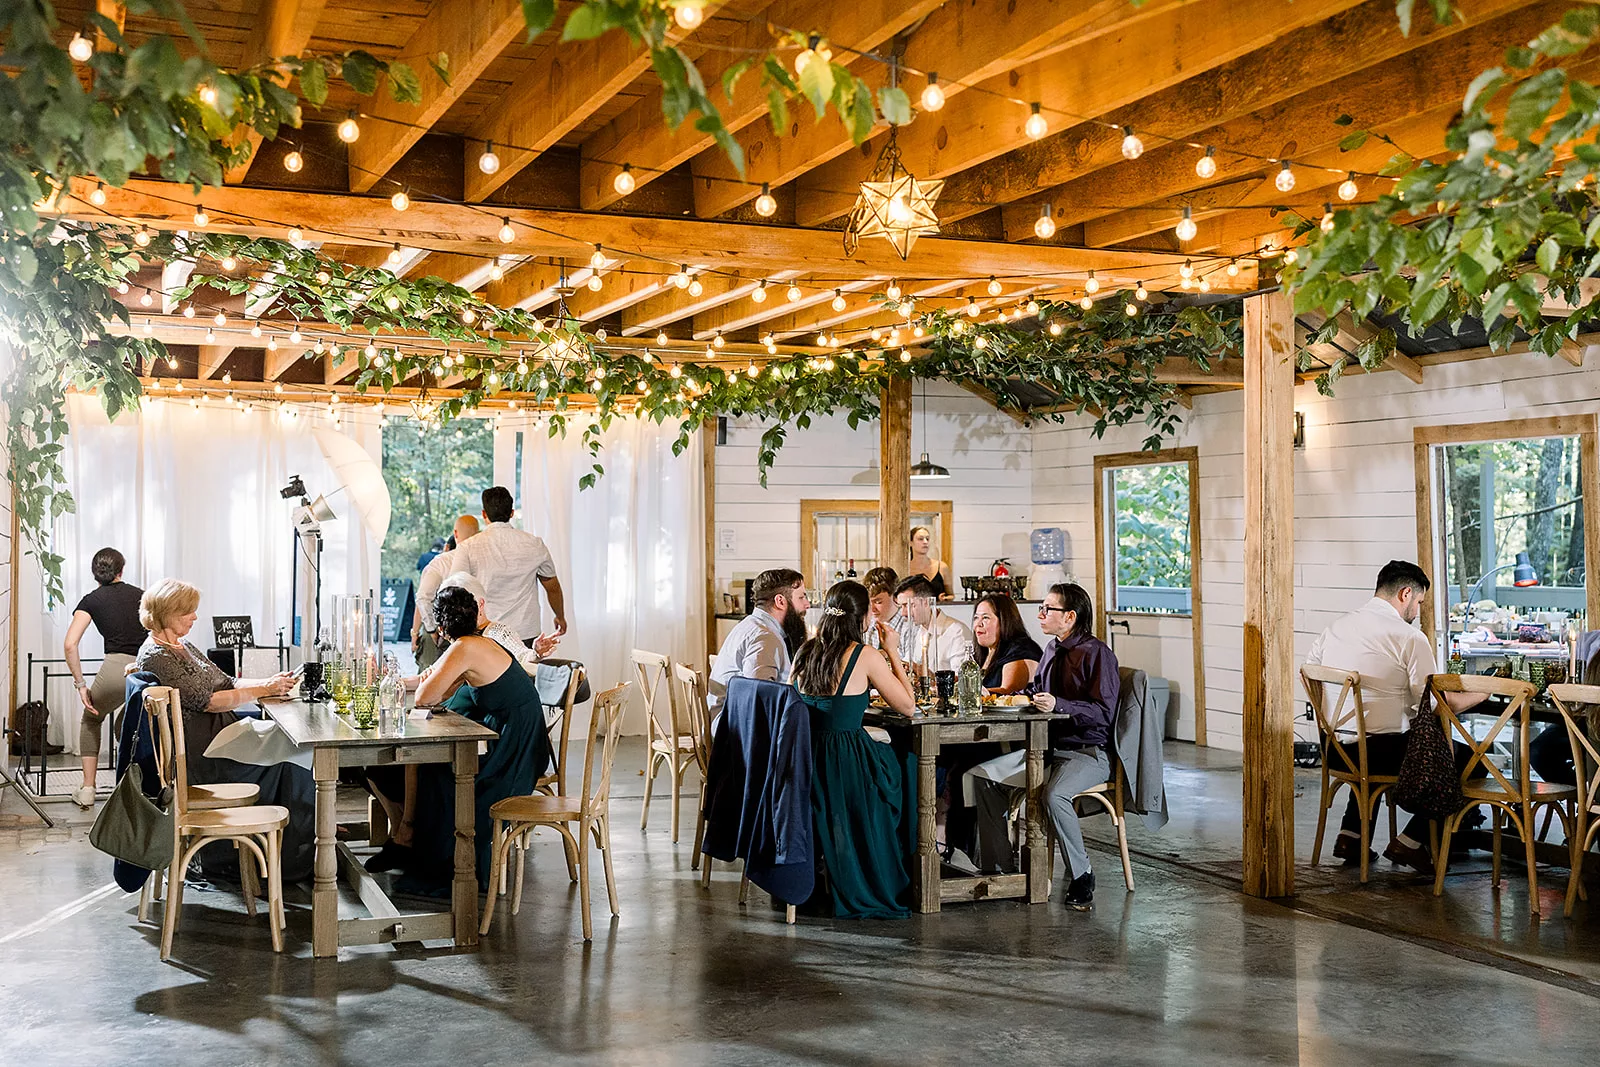 A group of wedding guests eat outdoors at a Sustainable Wedding Venue